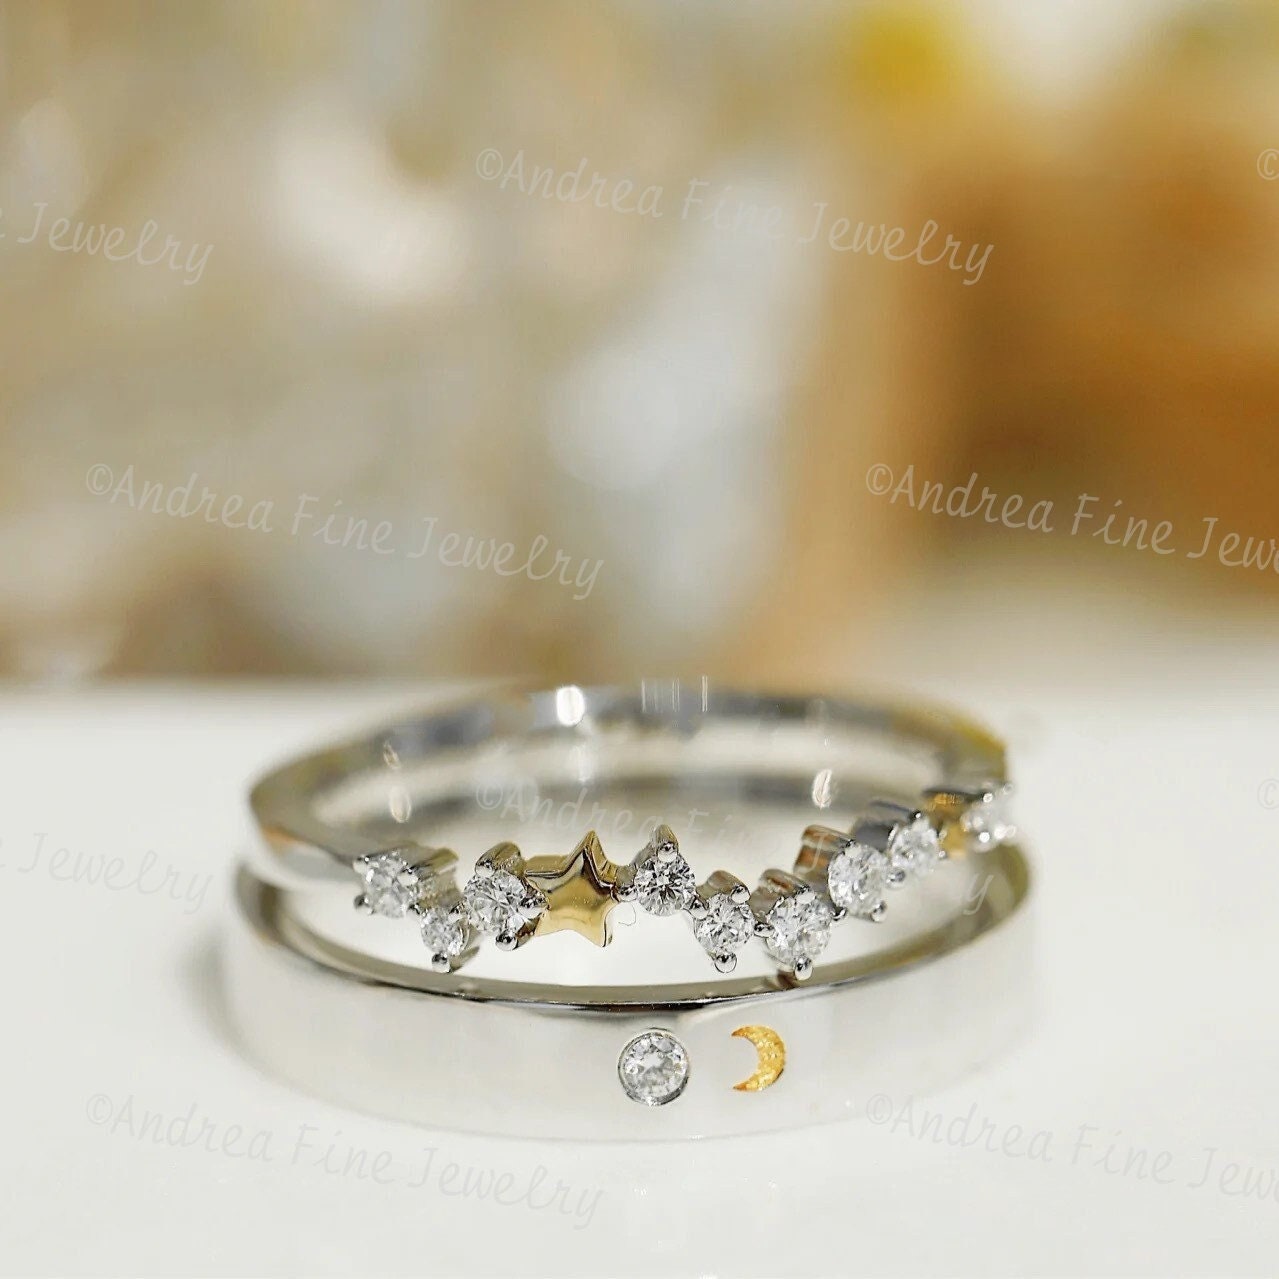 Have Stamp Simple Couple Rings Gold Personality Gold Silver Plated For Mens  And Women Engagement Wedding Jewelry Lover Gift From Zeimax, $6.88 |  DHgate.Com